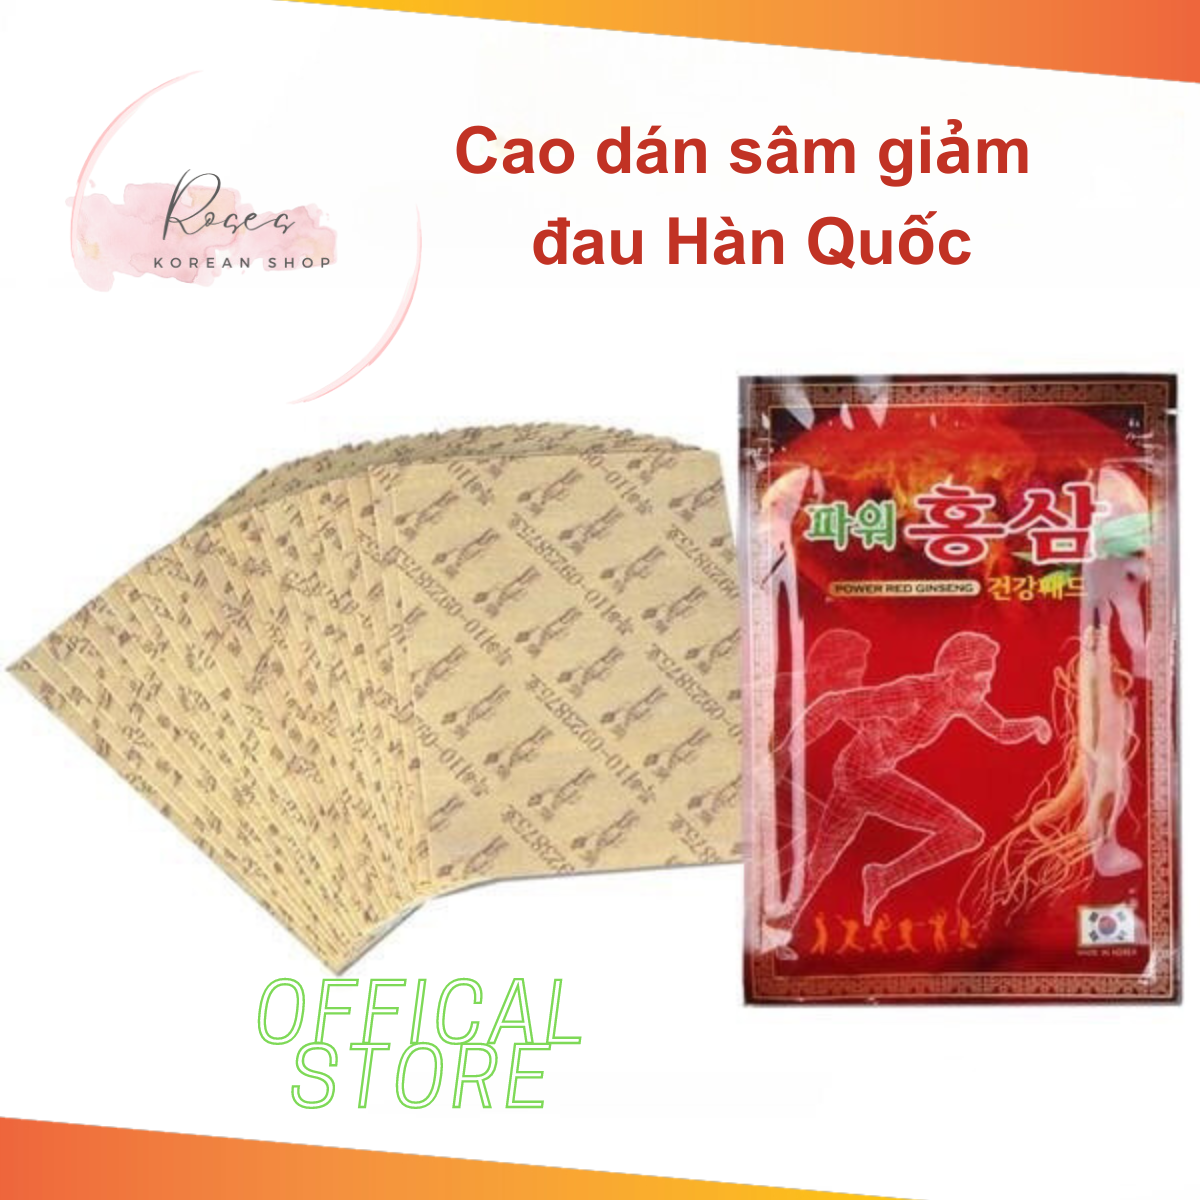 Genuine Korean ginseng stickers red yellow waist pain relief from back pain